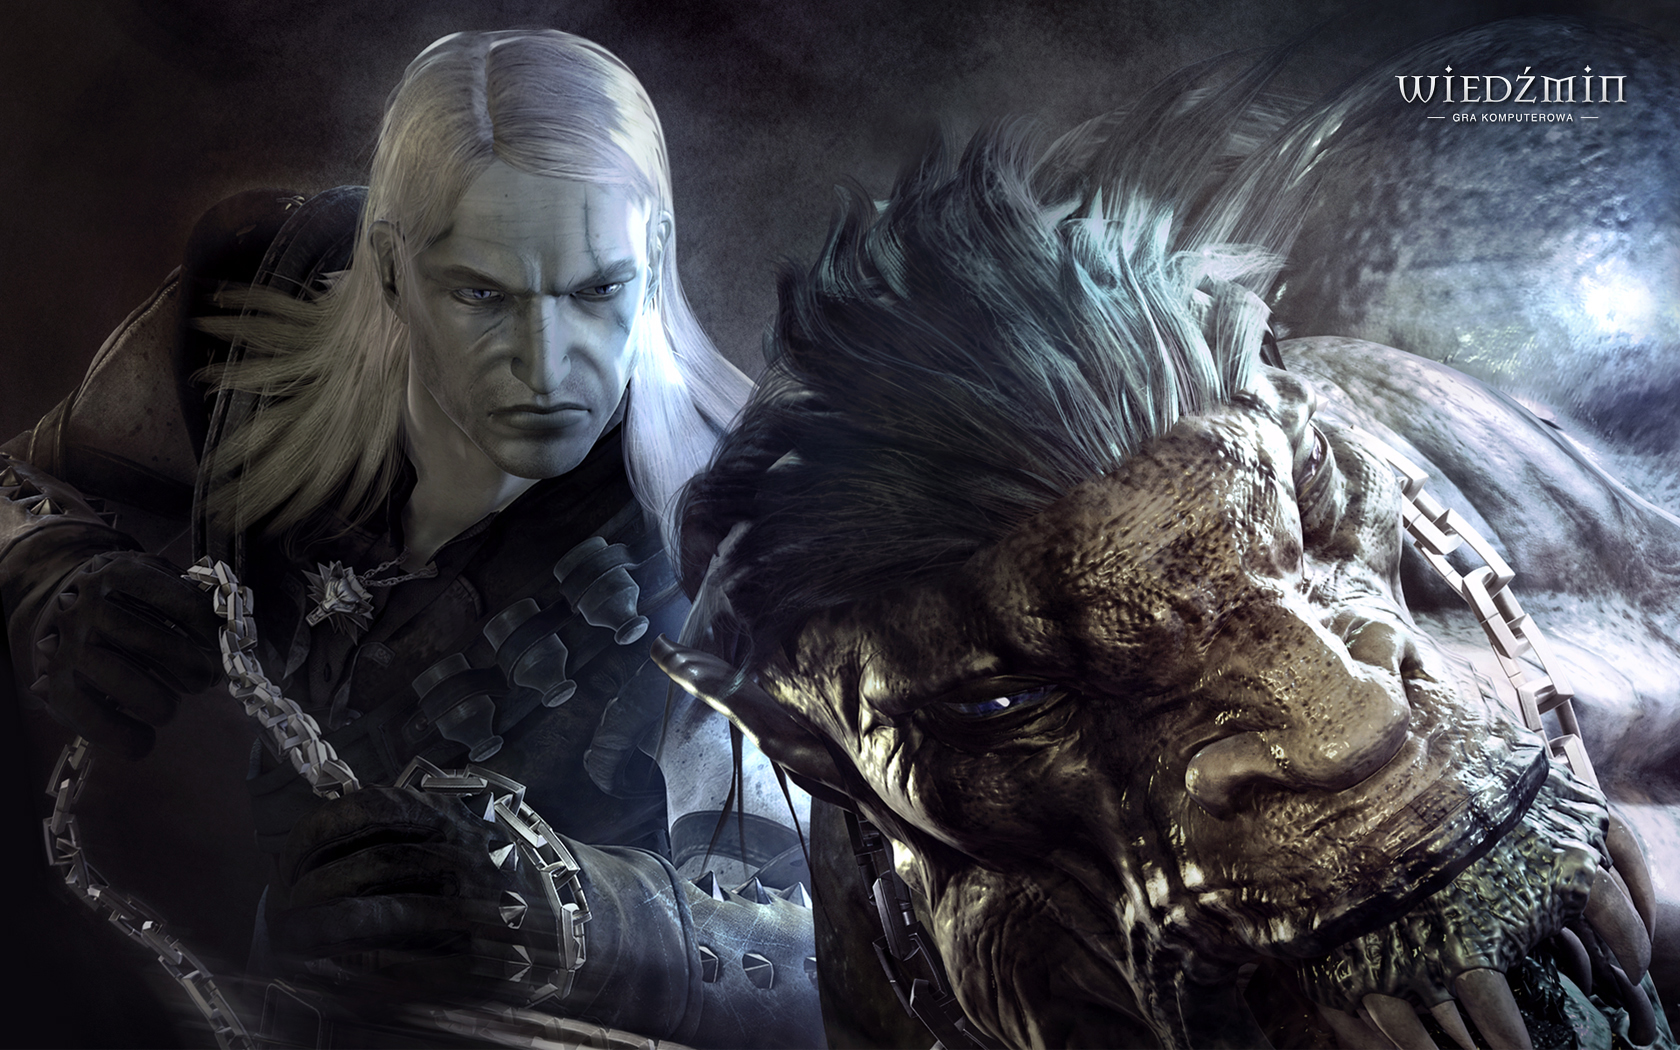 Download HQ The Witcher The Witcher wallpaper / 1680x1050